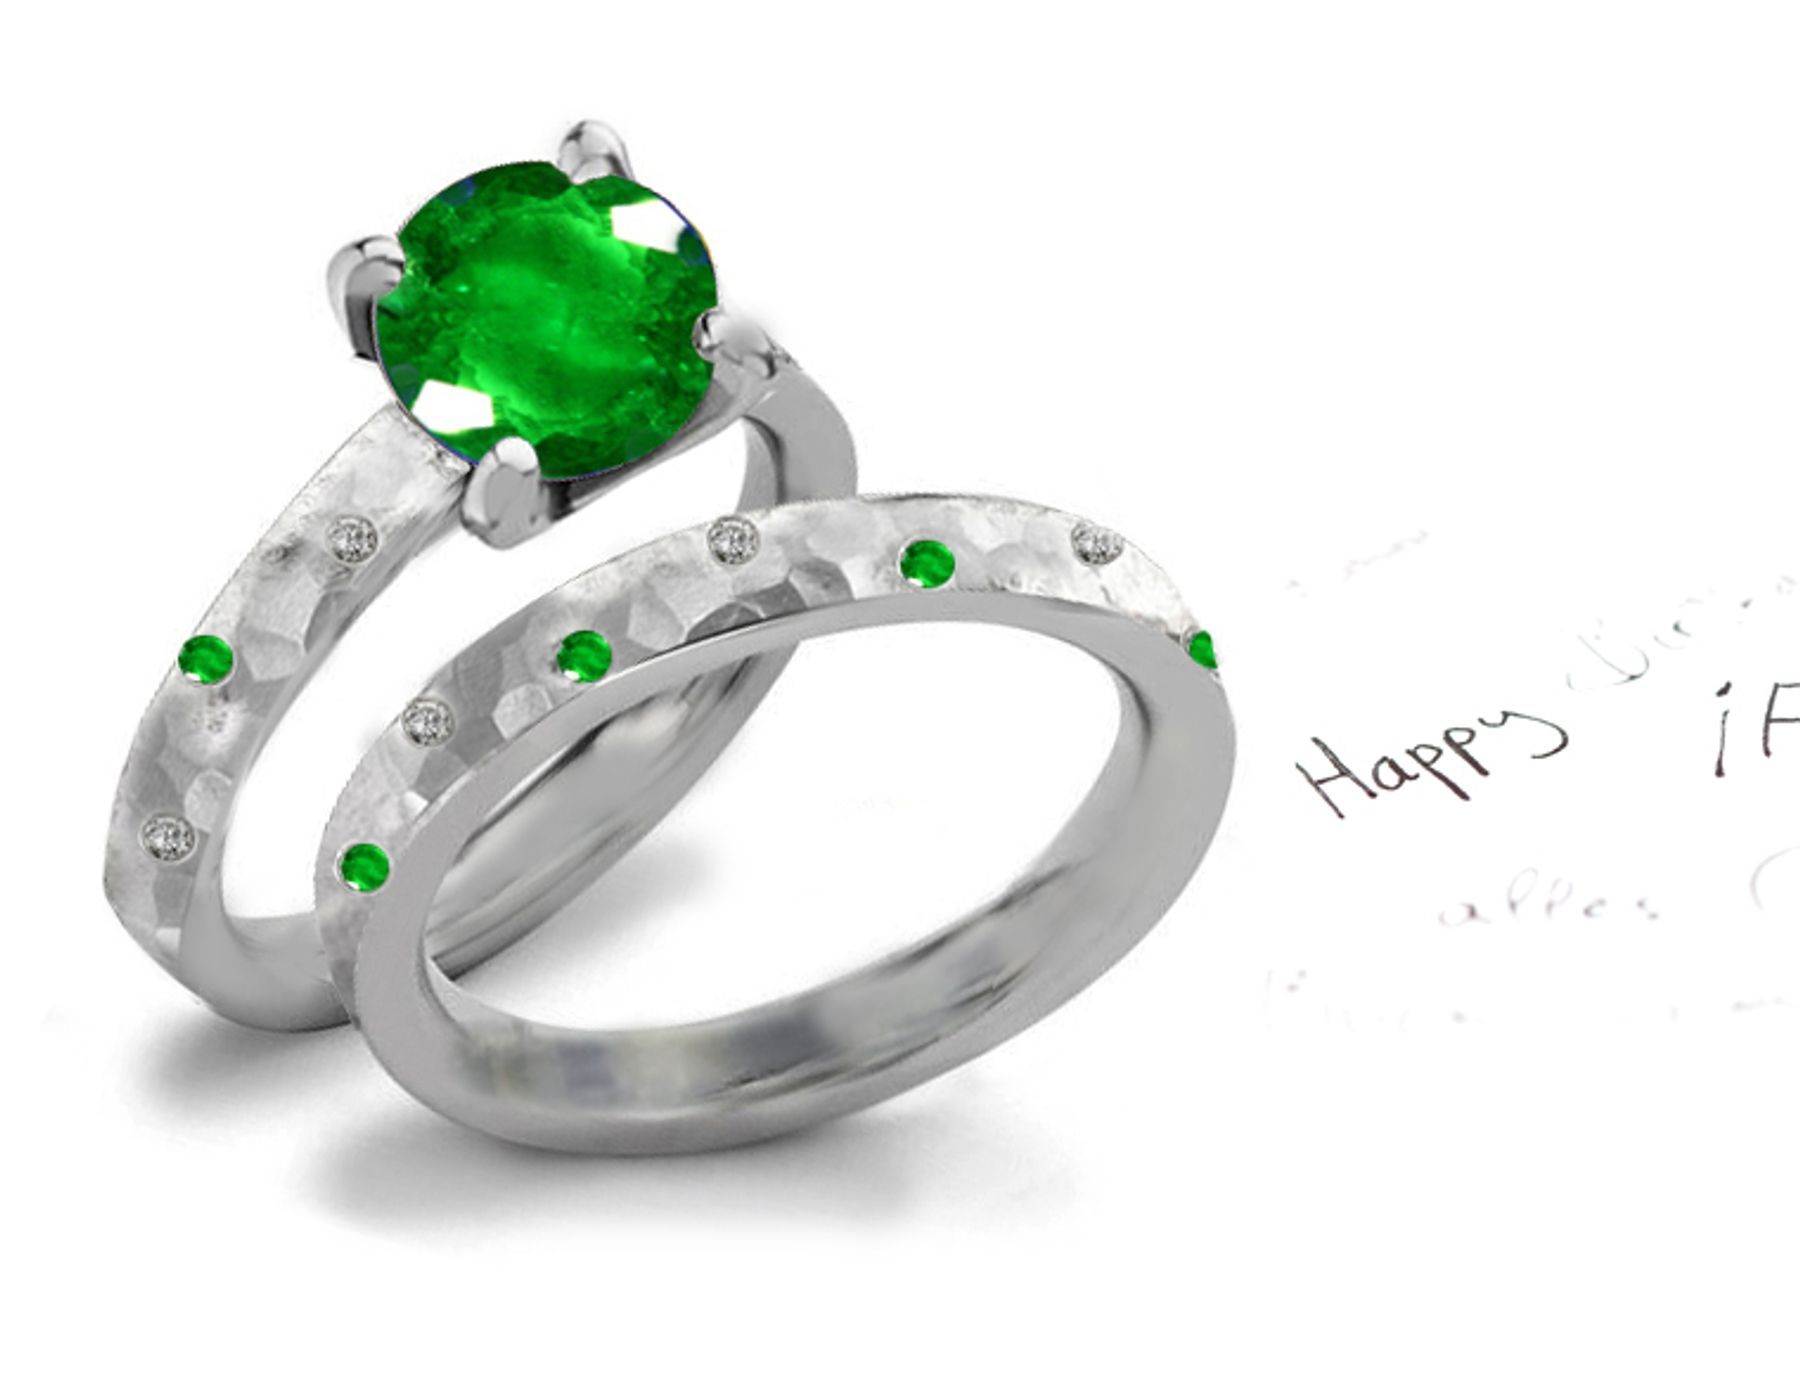 Made To Order in Gold: Beautiful Burnish Set Emerald & Diamond Ring in 14k Pure White Four Sided Solid Gold